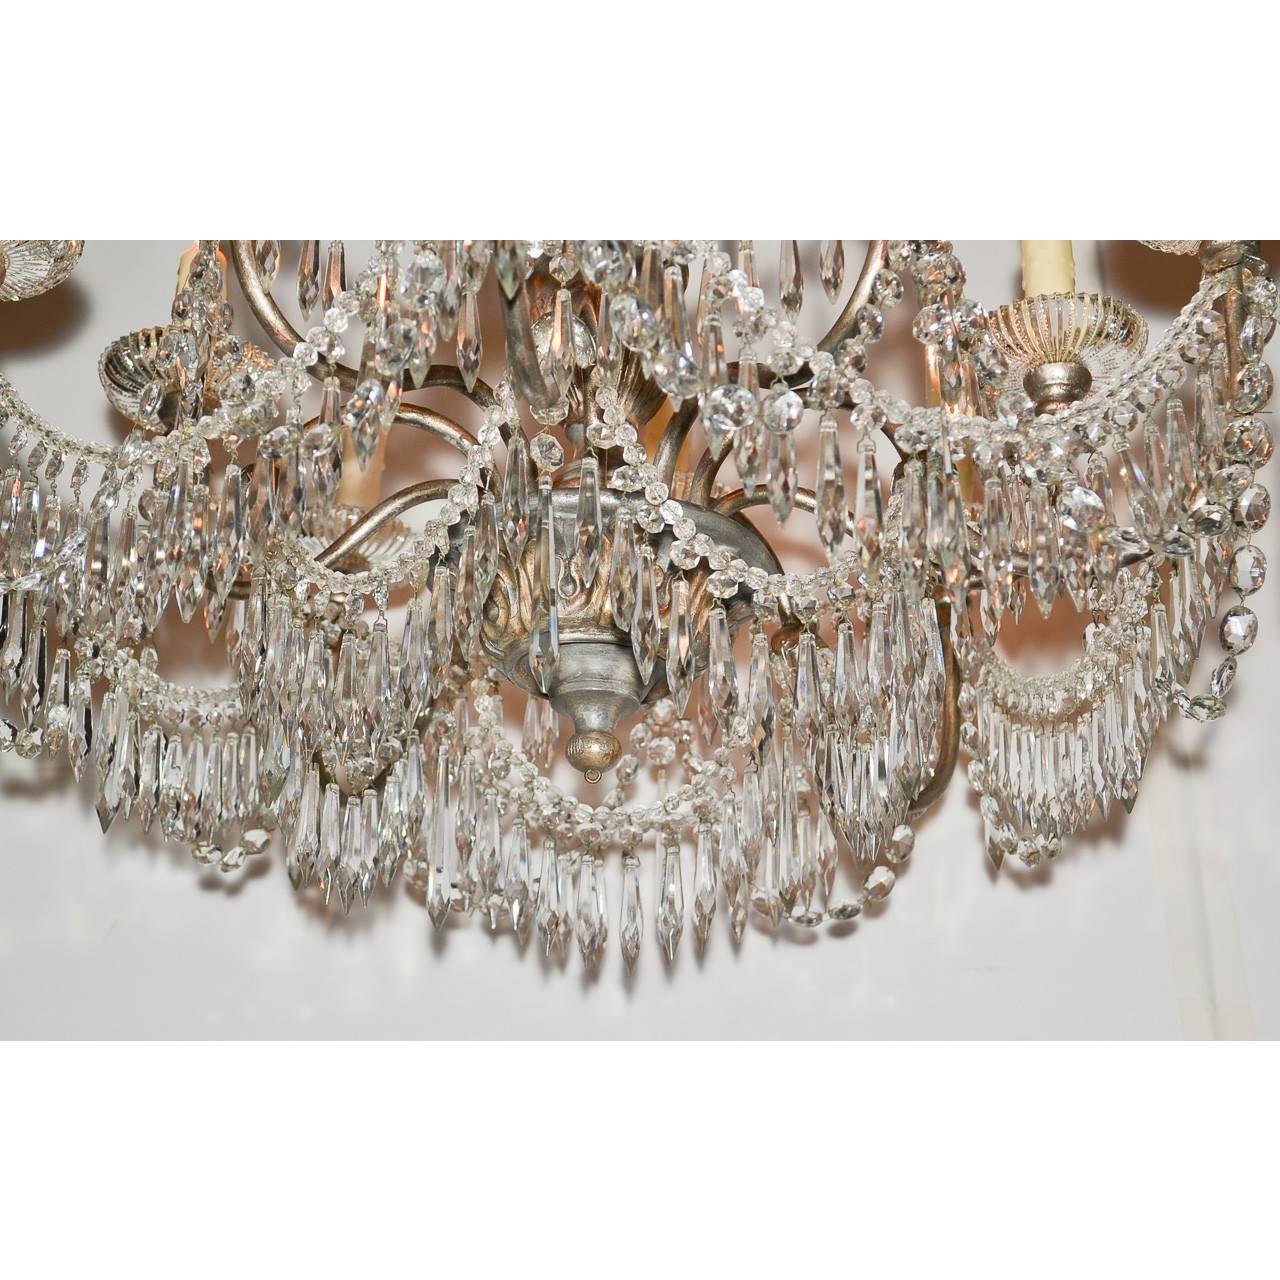 Uniquely designed early 20th century Italian olive-green painted and carved wood ten-light chandelier with muted gold highlights. The entire with draped bead crystal drops and enhanced with an abundance of spear-cut crystal prisms.